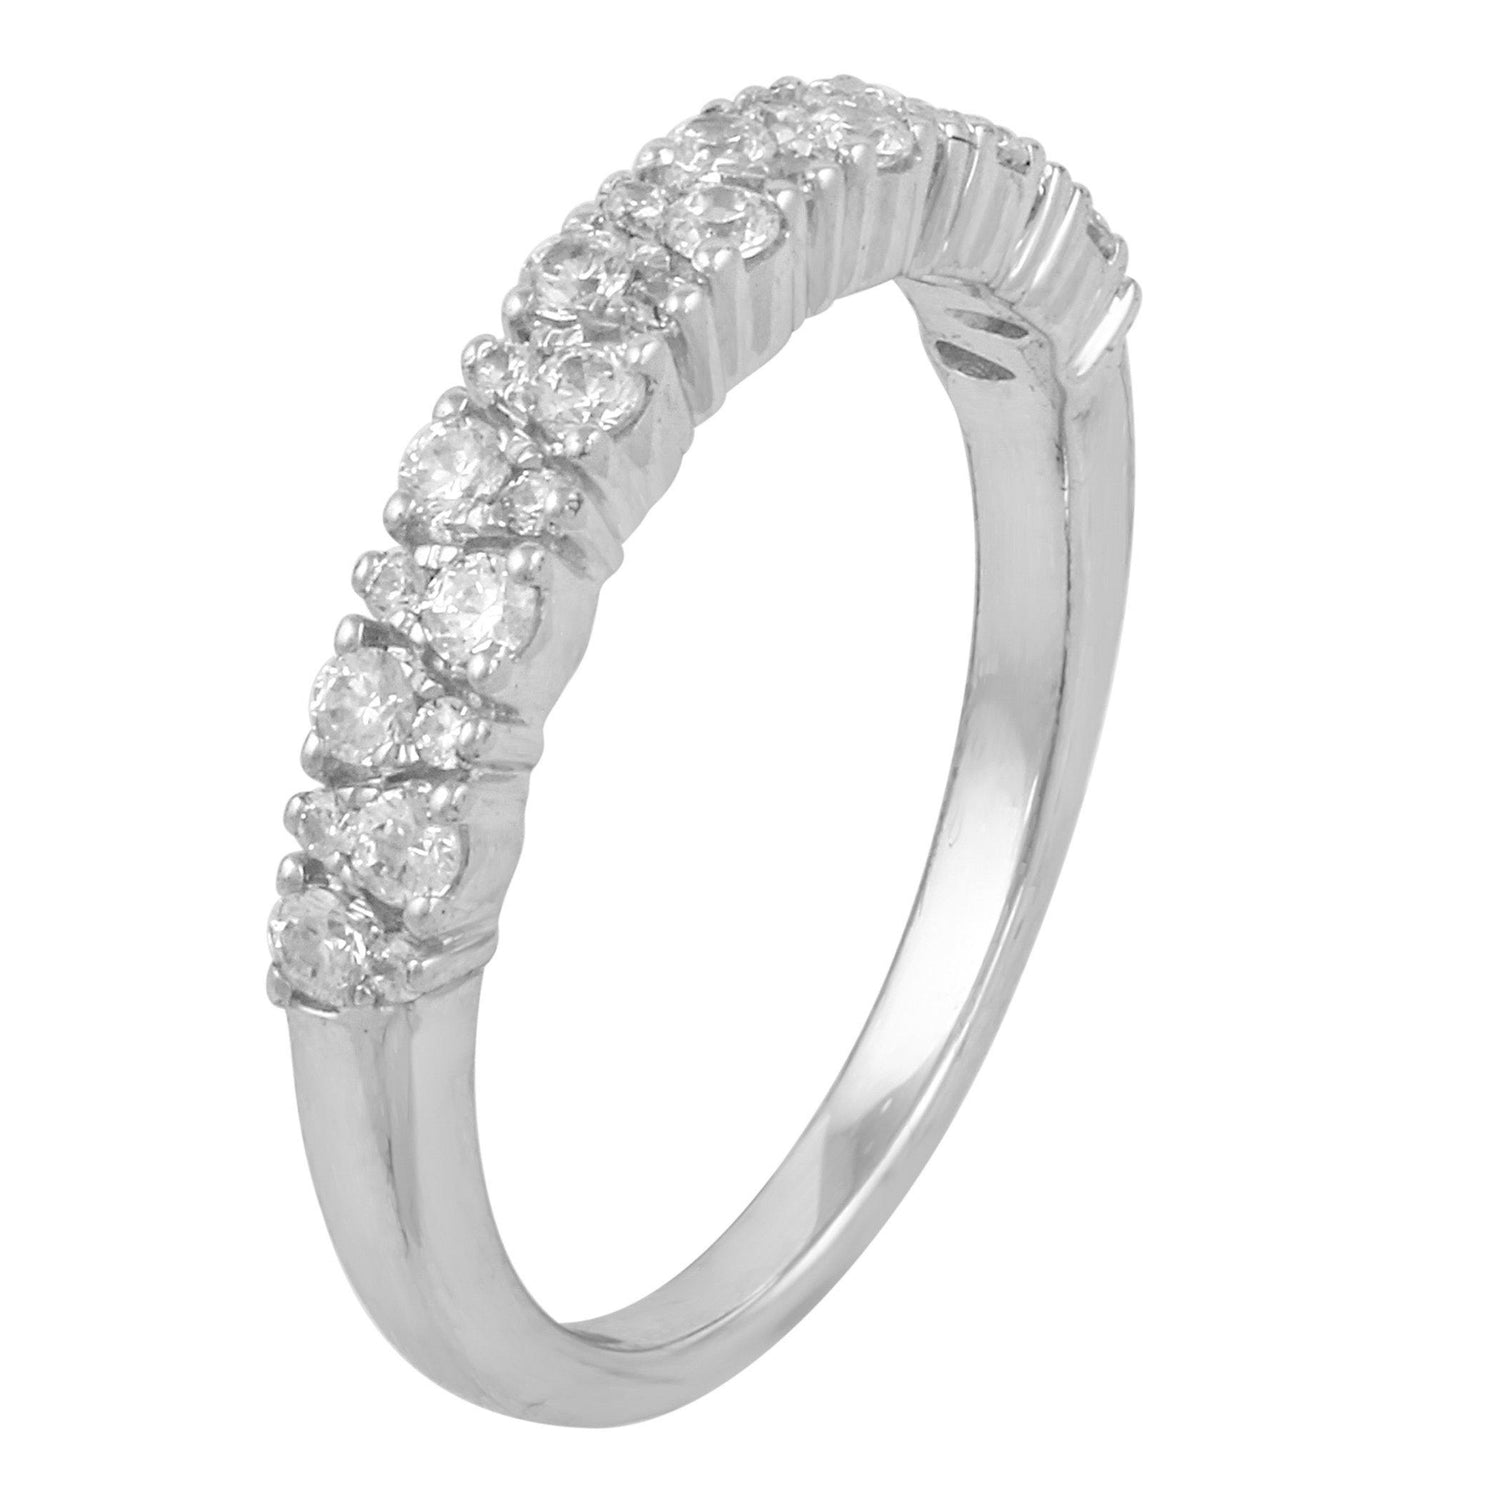 1/2CT TW Diamond Wedding band Ring in Sterling Silver - Fifth and Fine